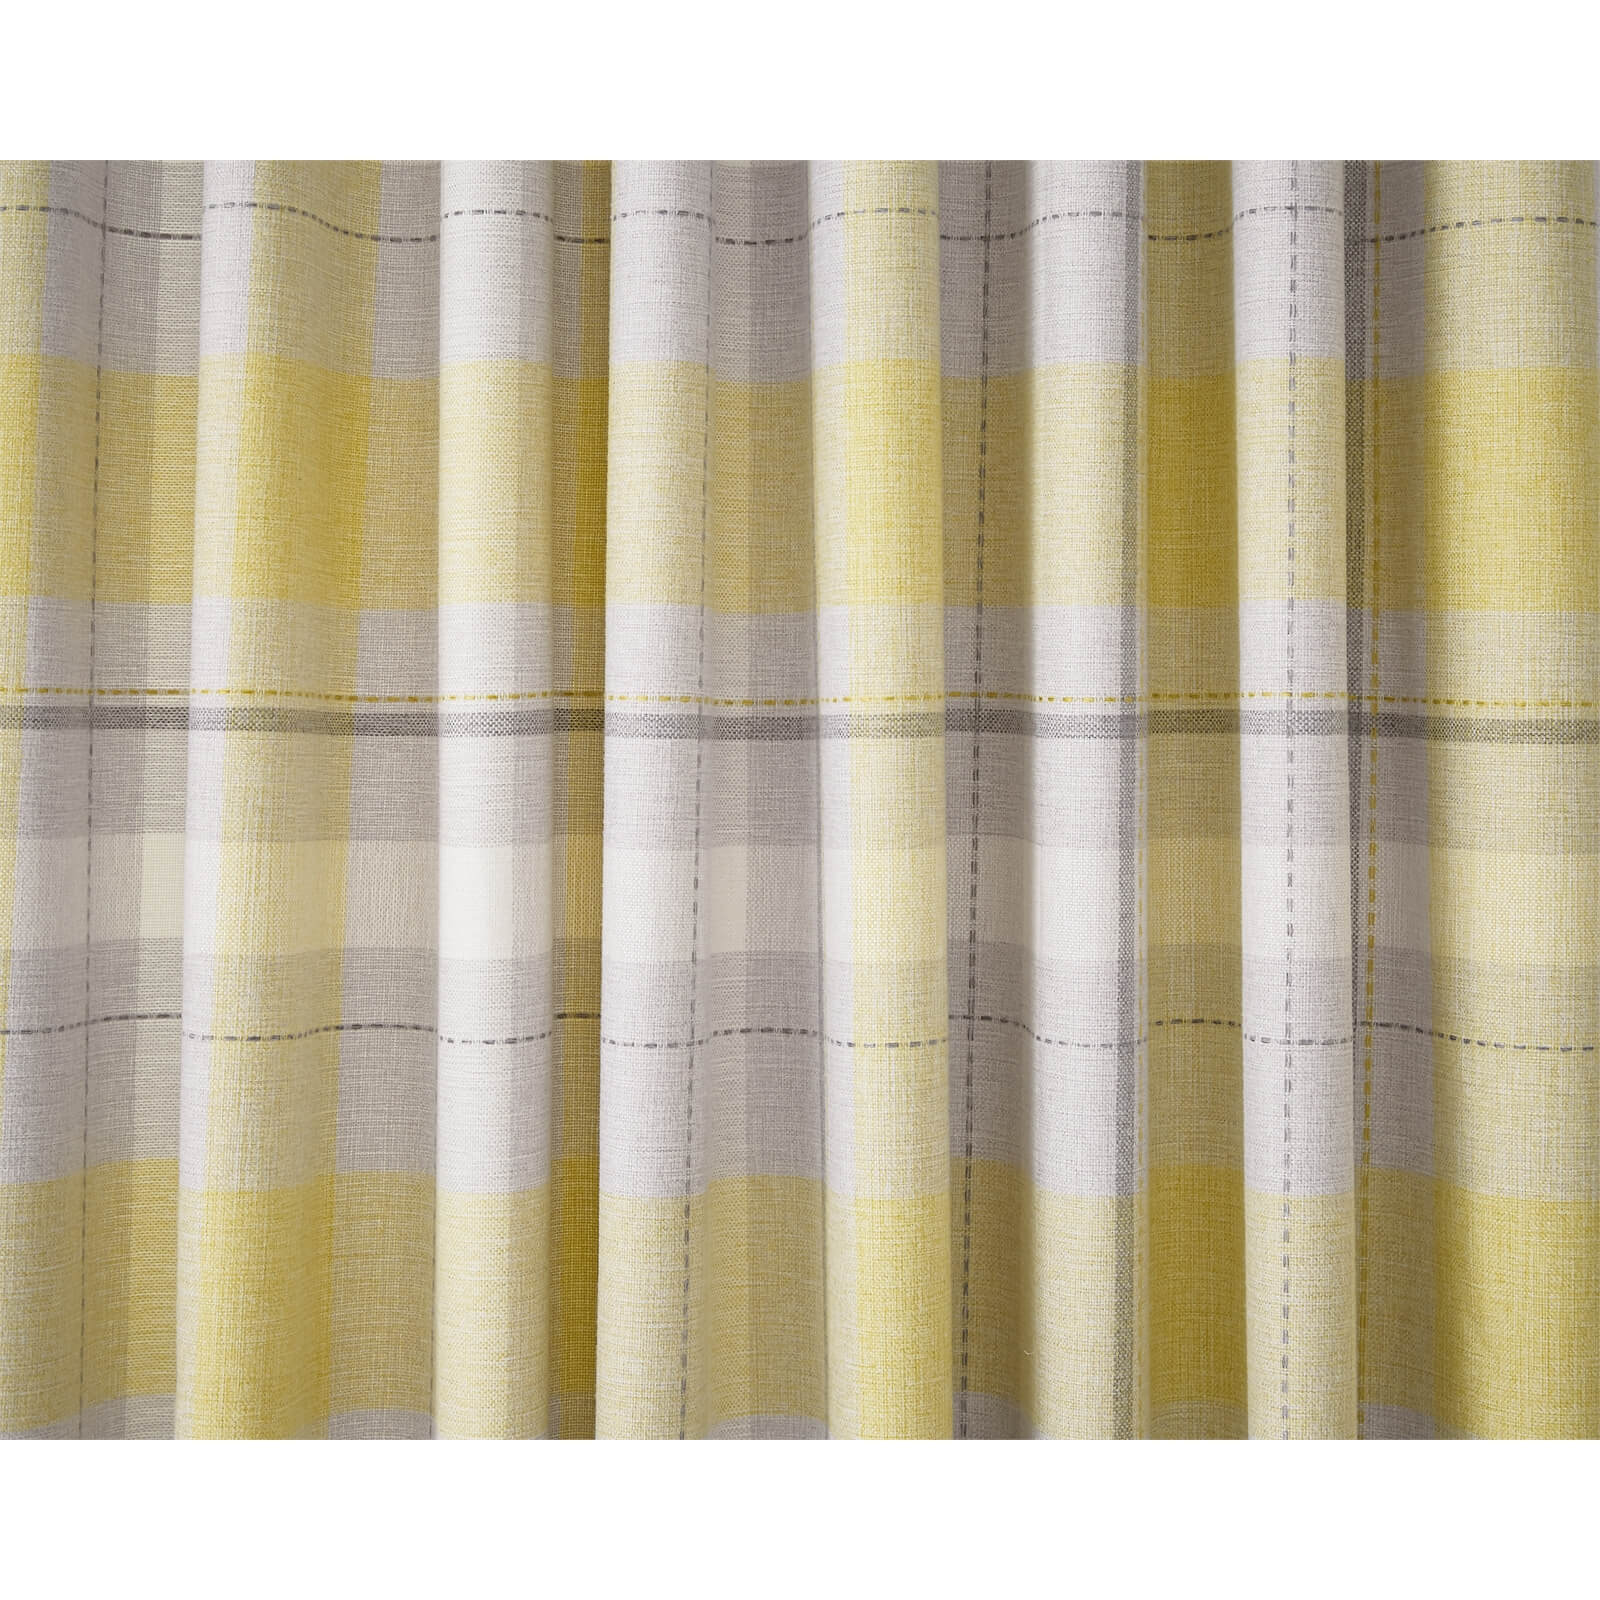 Helena Springfield Nora Lined Curtains 90 x 72 - Chartreuse